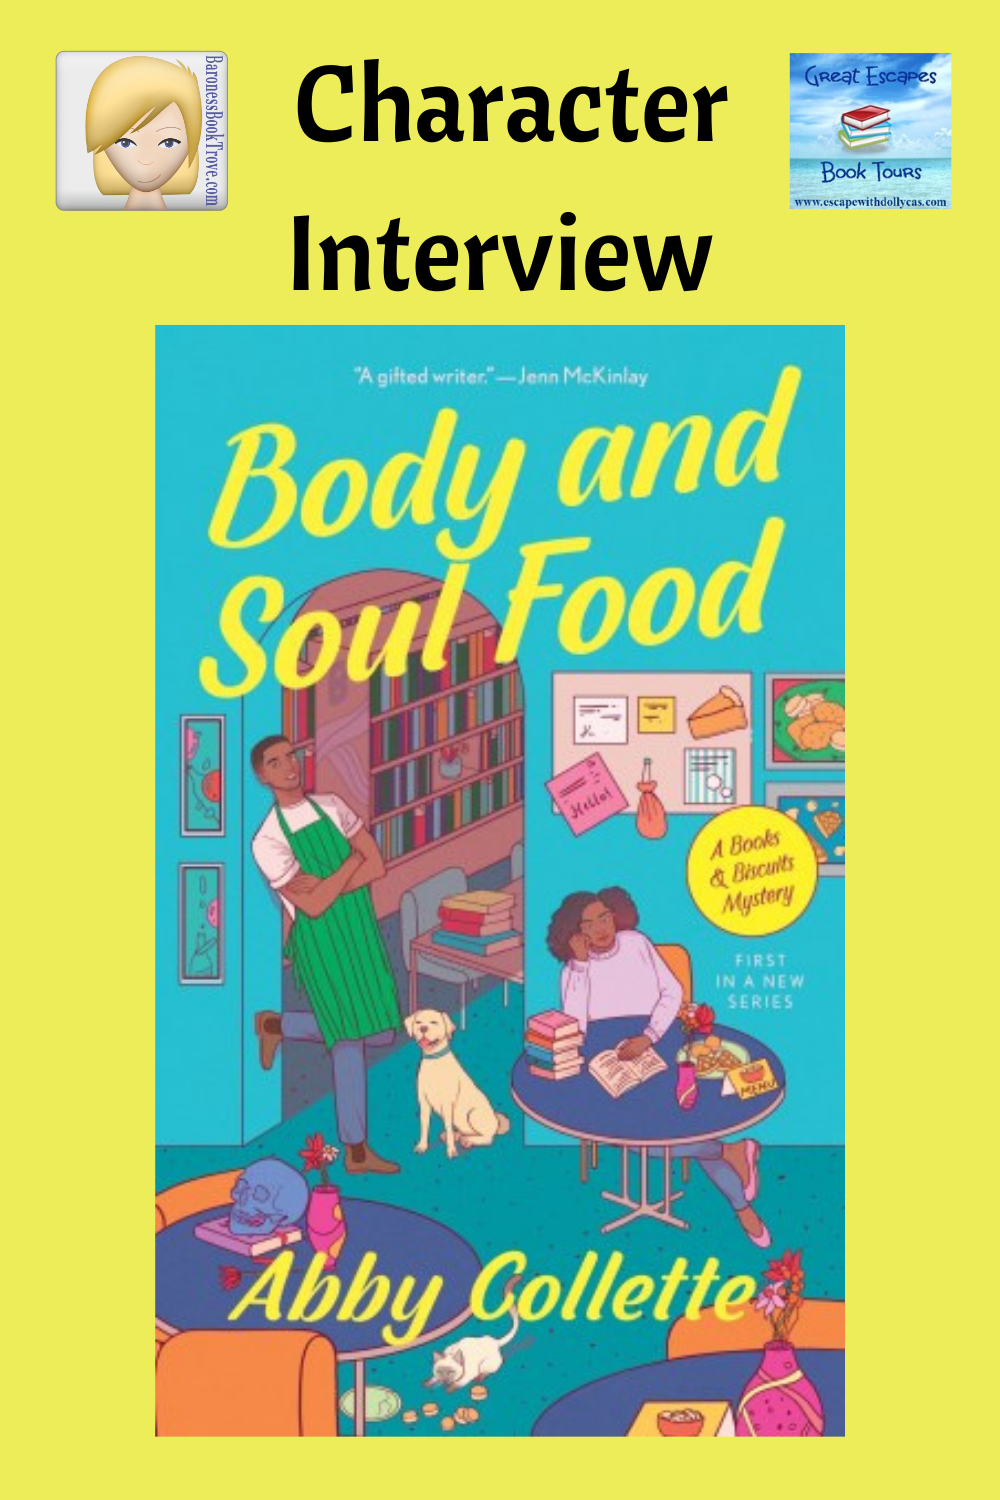 Body and Soul Food by Abby Collette